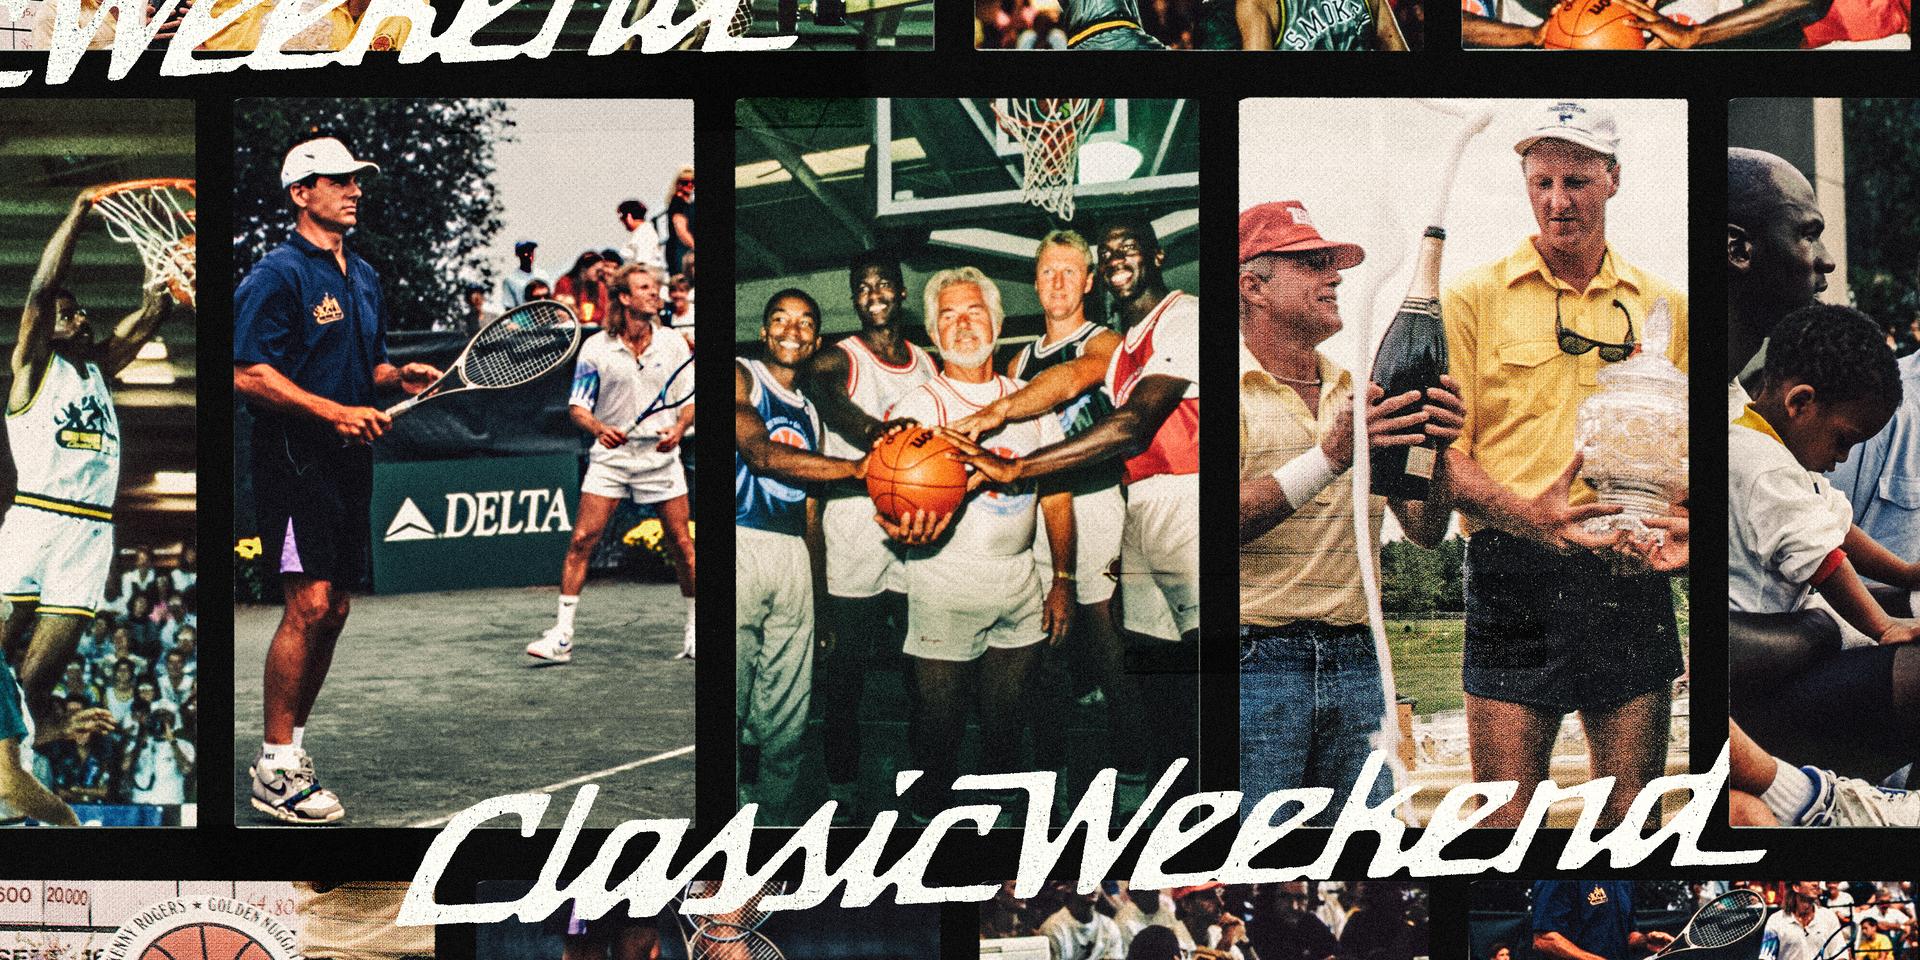 Michael Jordan and Woody Harrelson: Tales from the Kenny Rogers Classic Weekend